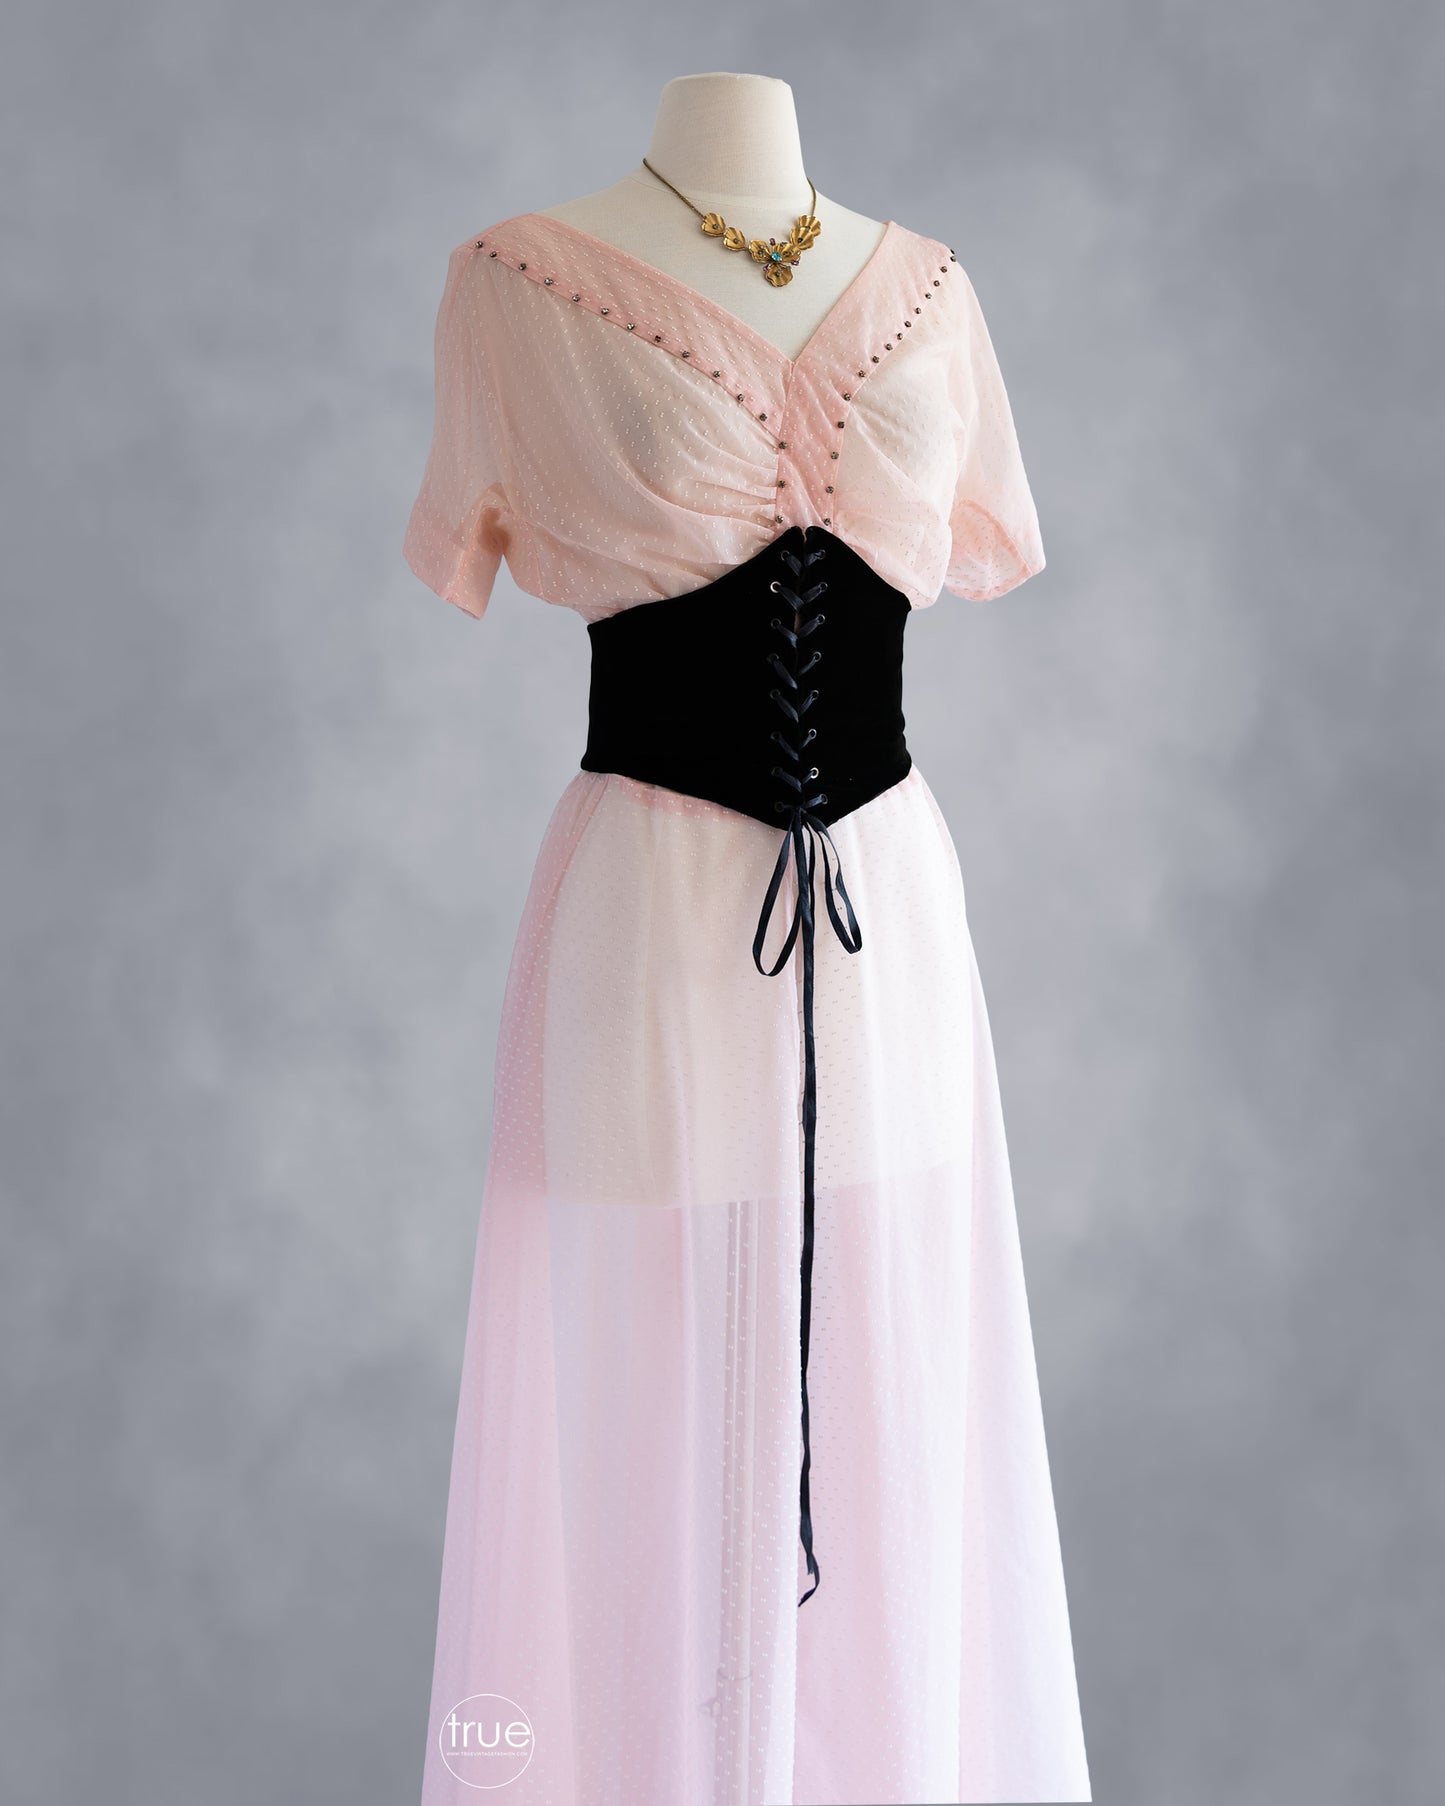 vintage 1940's dress ...sheer pink flocked swiss dots dress with a rhinestone trimmed asymmetrical shirred bodice and full skirt